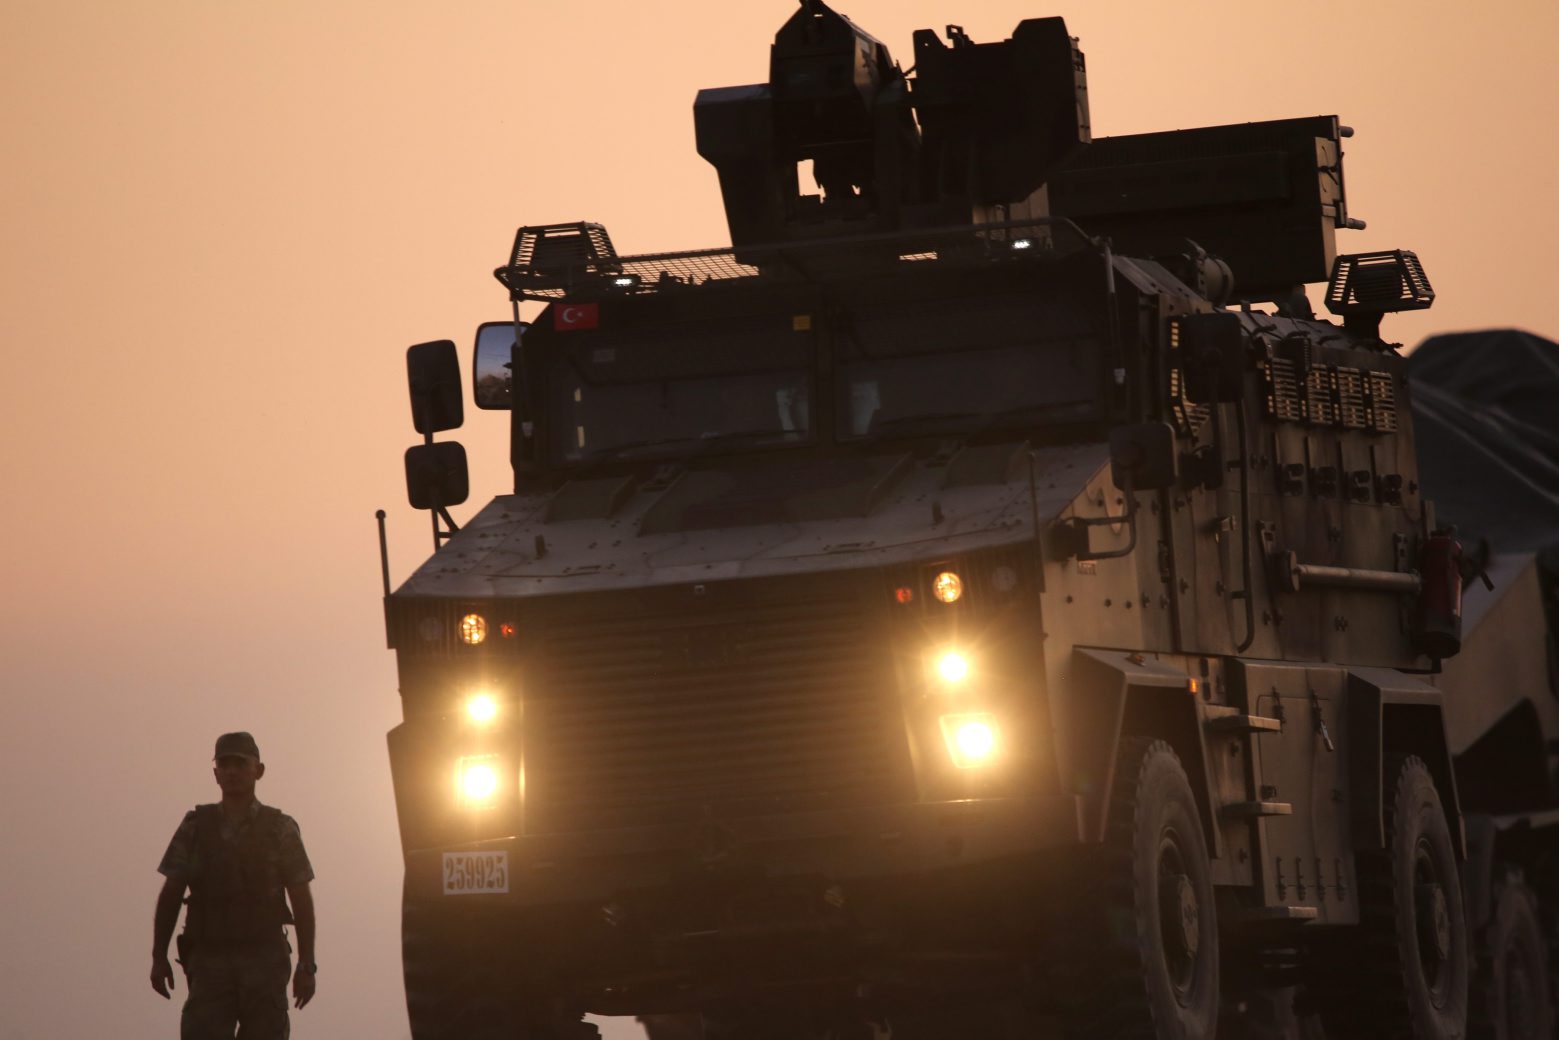 epa07908167 Turkish soldiers with armored vehicles during a military operation in Kurdish areas of northern Syria, near the Syrian border, in Akcakale, Sanliurfa, Turkey 09 October 2019. Turkey has launched an offensive targeting Kurdish forces in north-eastern Syria, days after the US withdrew troops from the area.  EPA/STR TURKEY SYRIA CONFLICT